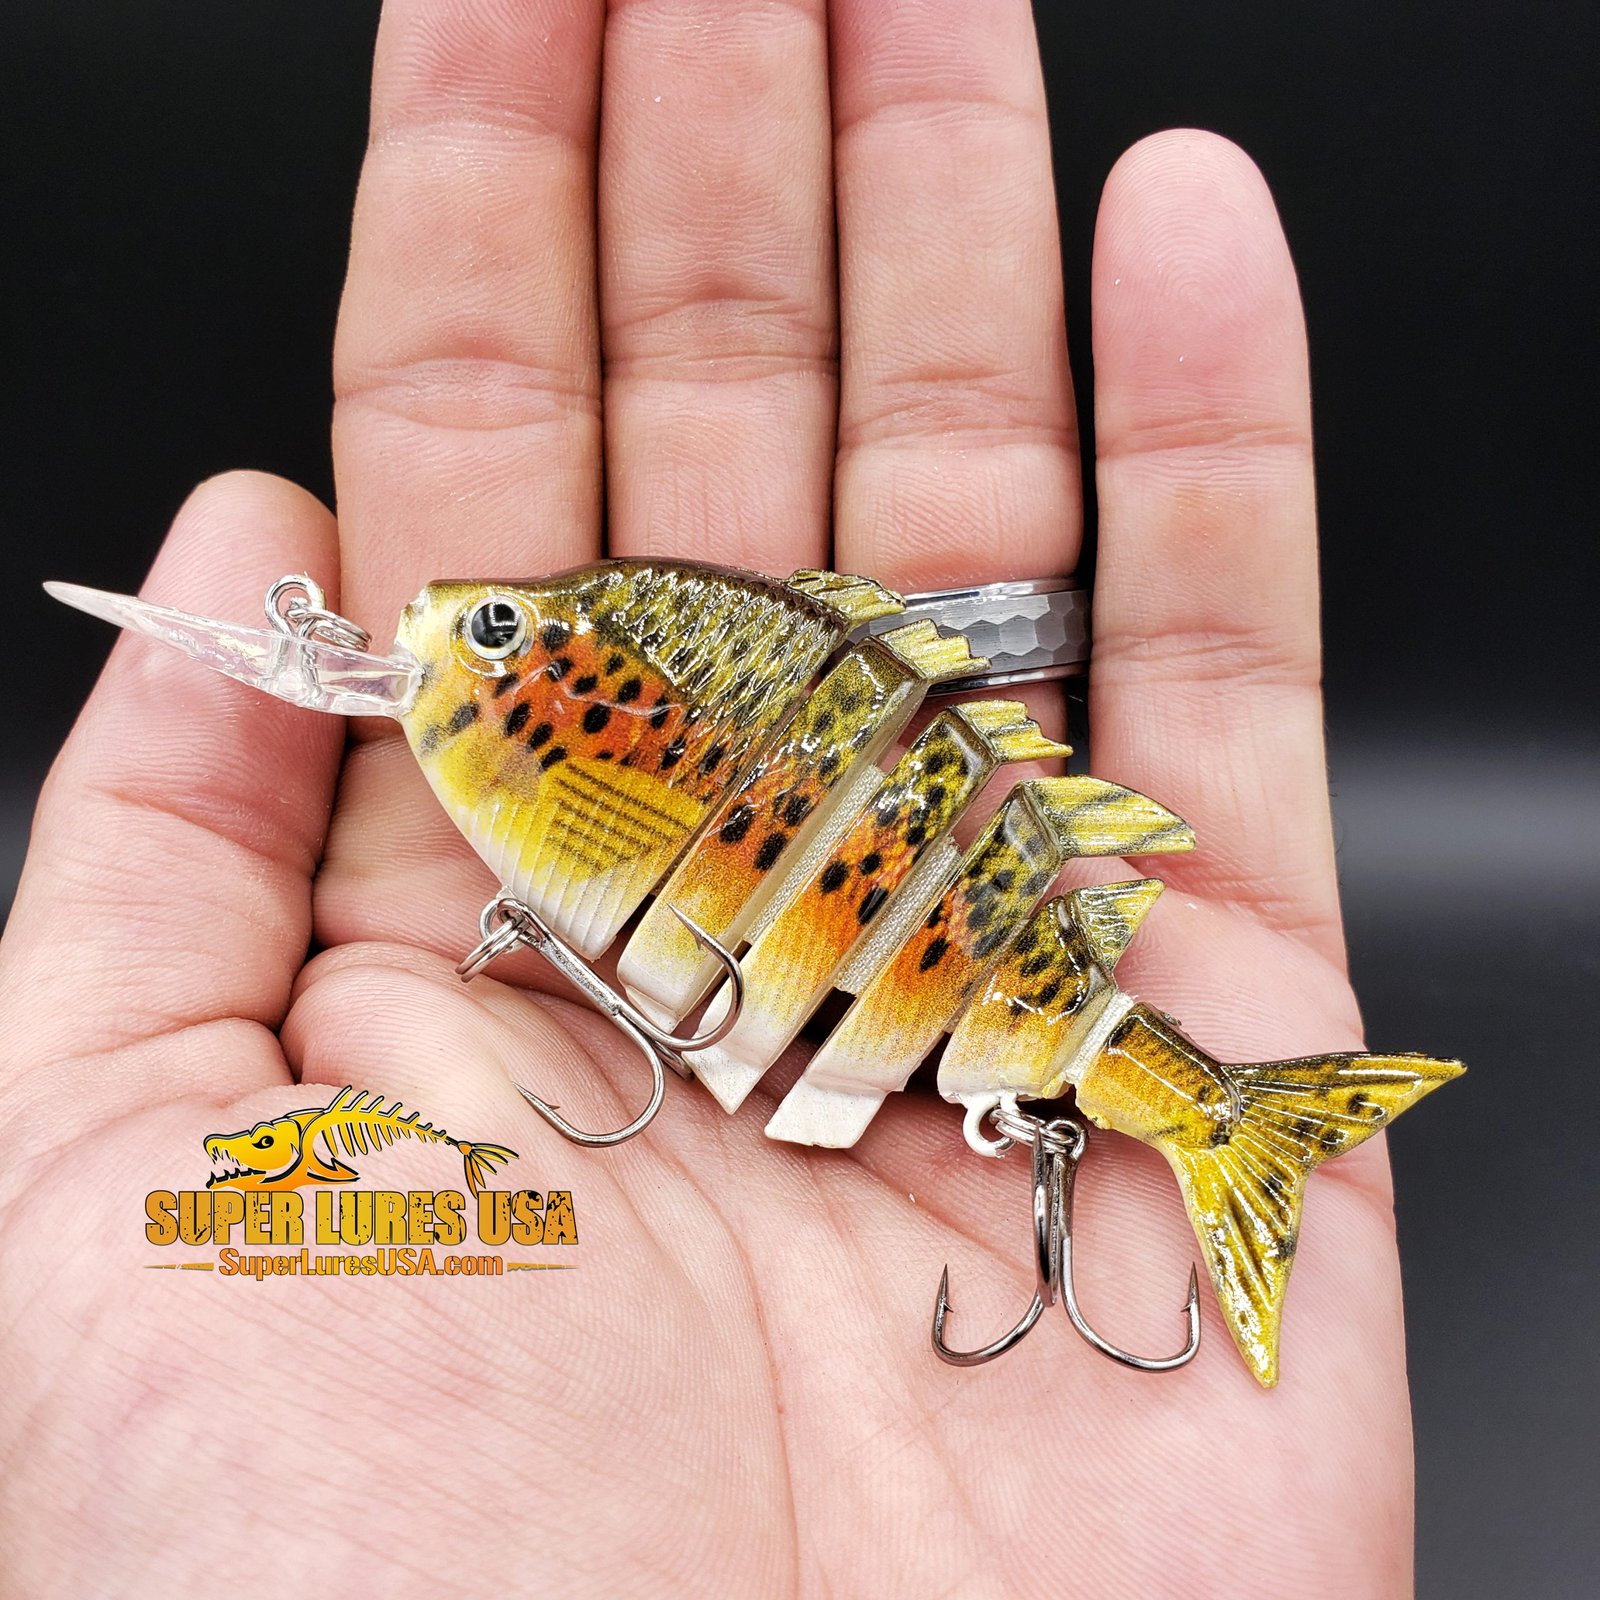 Lipped Jointed Swimbait fishing lure (V1)-Sinking- 3 inch